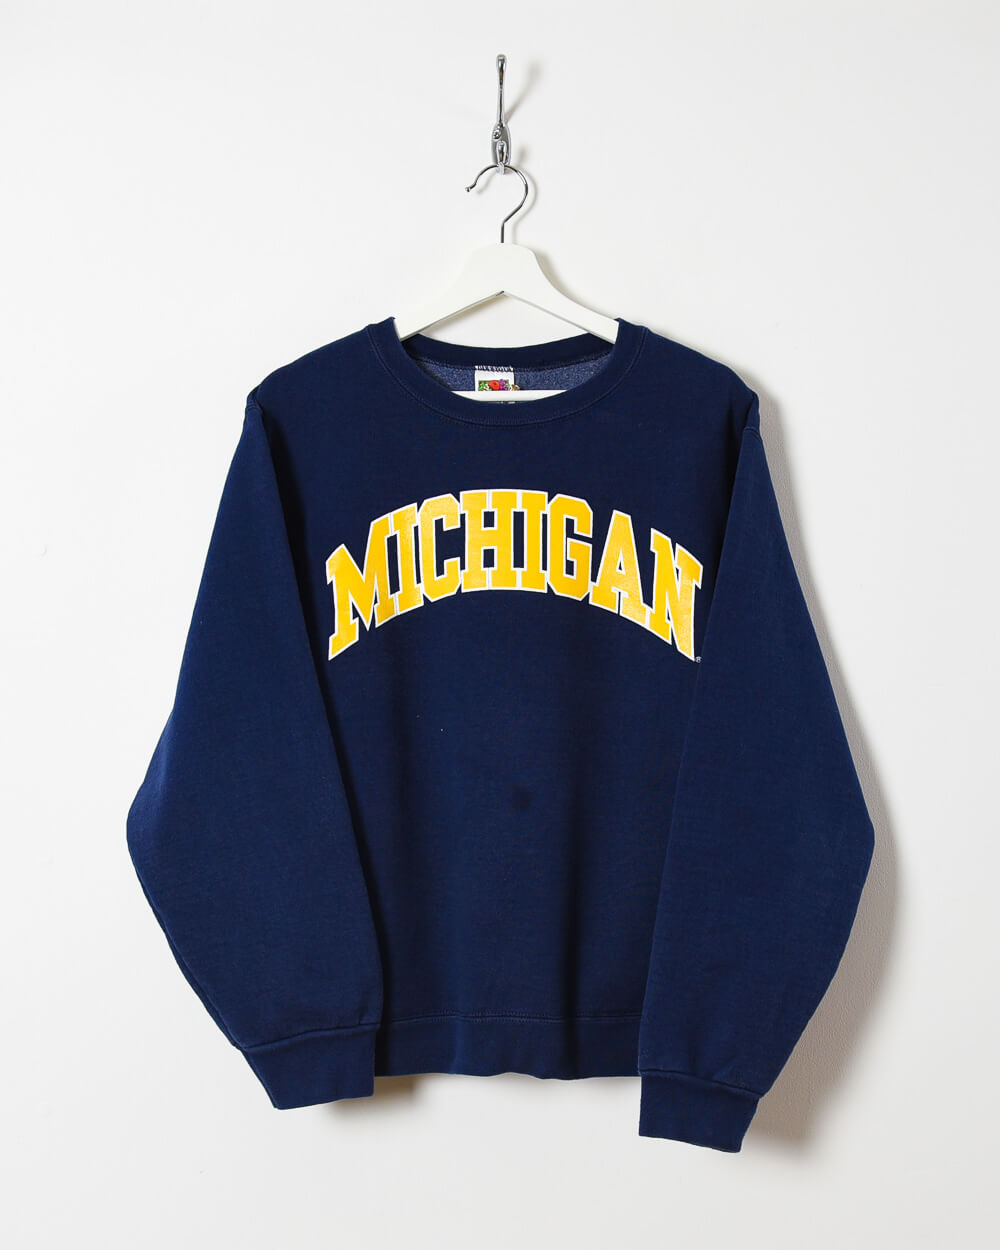 Fruit of the Loom Michigan Sweatshirt - Small - Domno Vintage 90s, 80s, 00s Retro and Vintage Clothing 